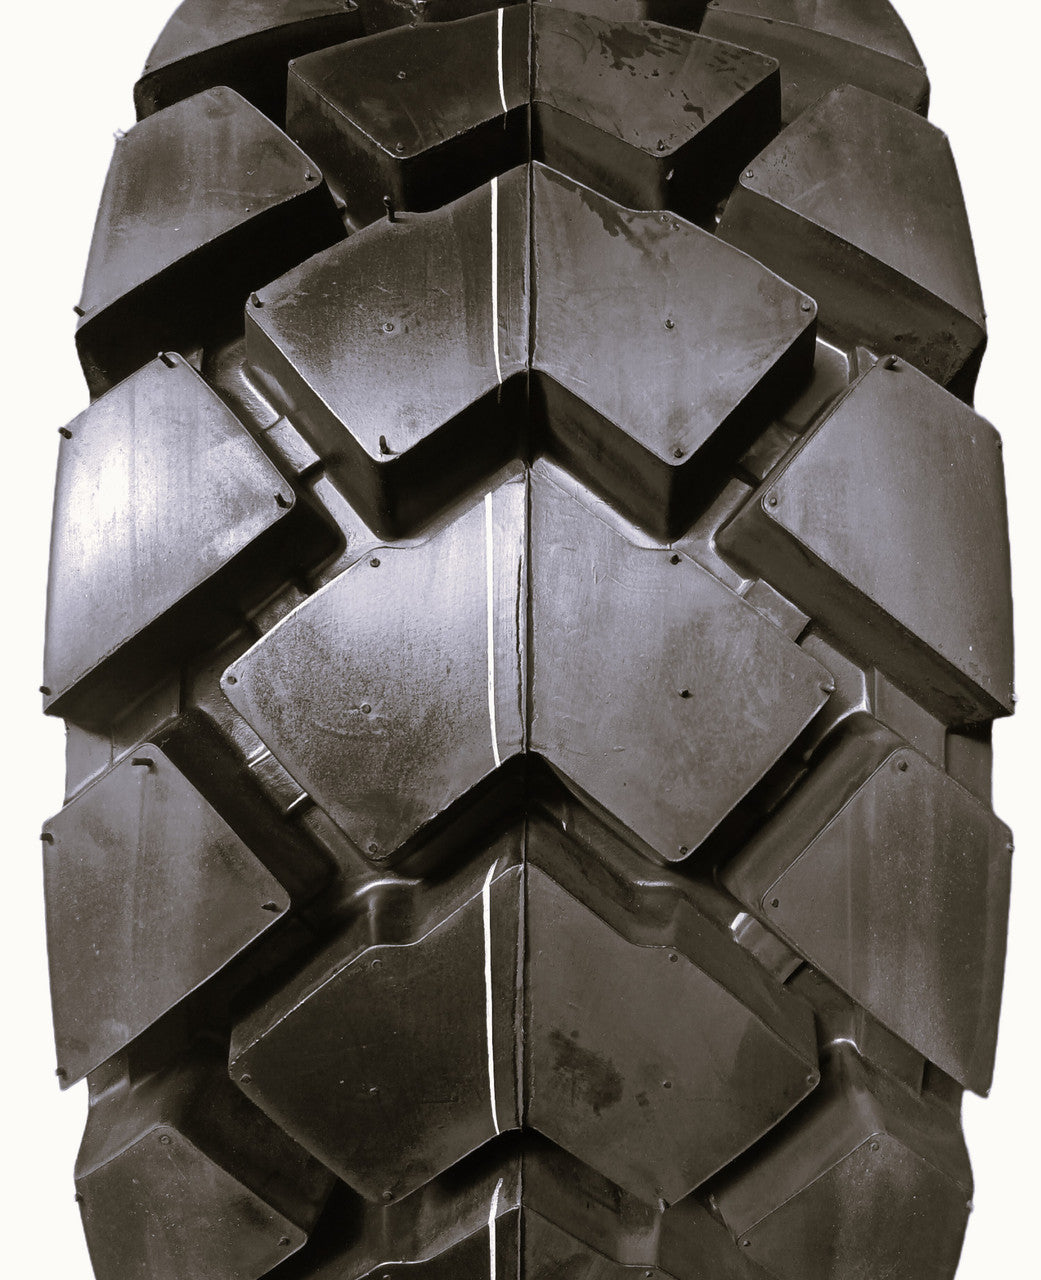 12-16.5 Skid Steer Tubeless Tire w/Rim-Guard 16 Ply Rating Super Heavy Duty H Load 305/70-16.5 12x16.5 NHS L-5 SKS6 12 16.5